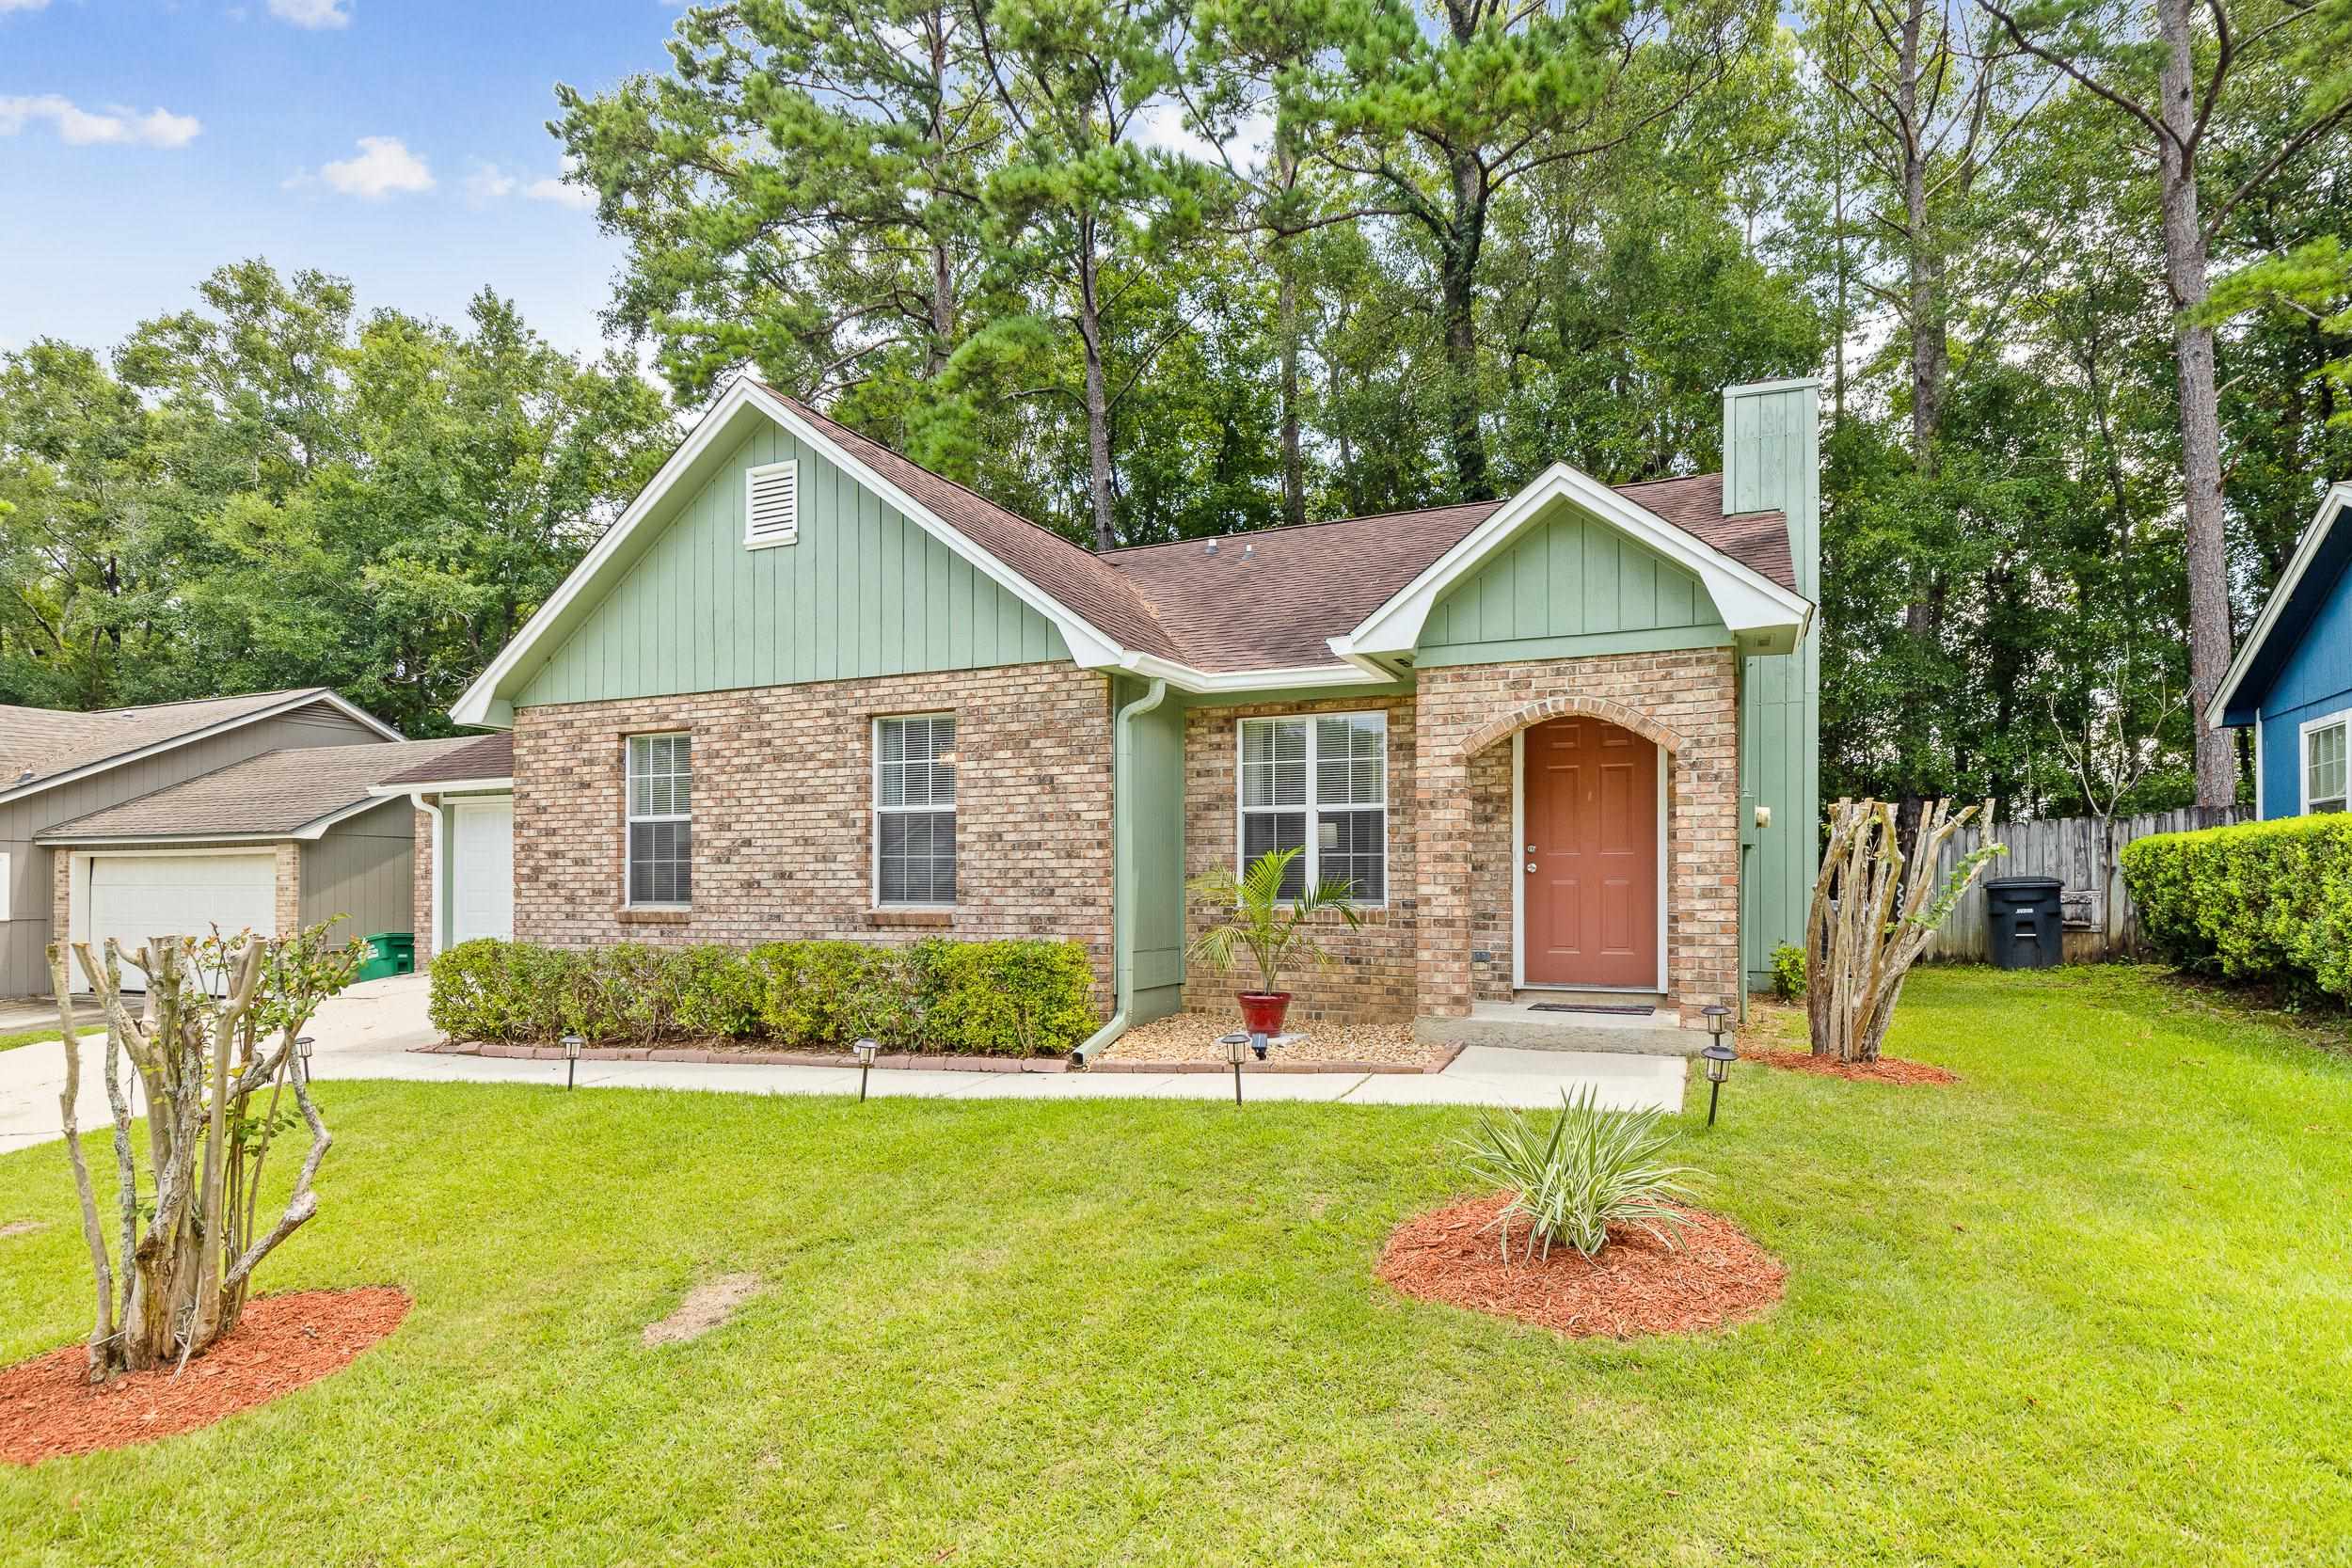 4236 Red Oak Drive,TALLAHASSEE,Florida 32311,3 Bedrooms Bedrooms,2 BathroomsBathrooms,Detached single family,4236 Red Oak Drive,368460